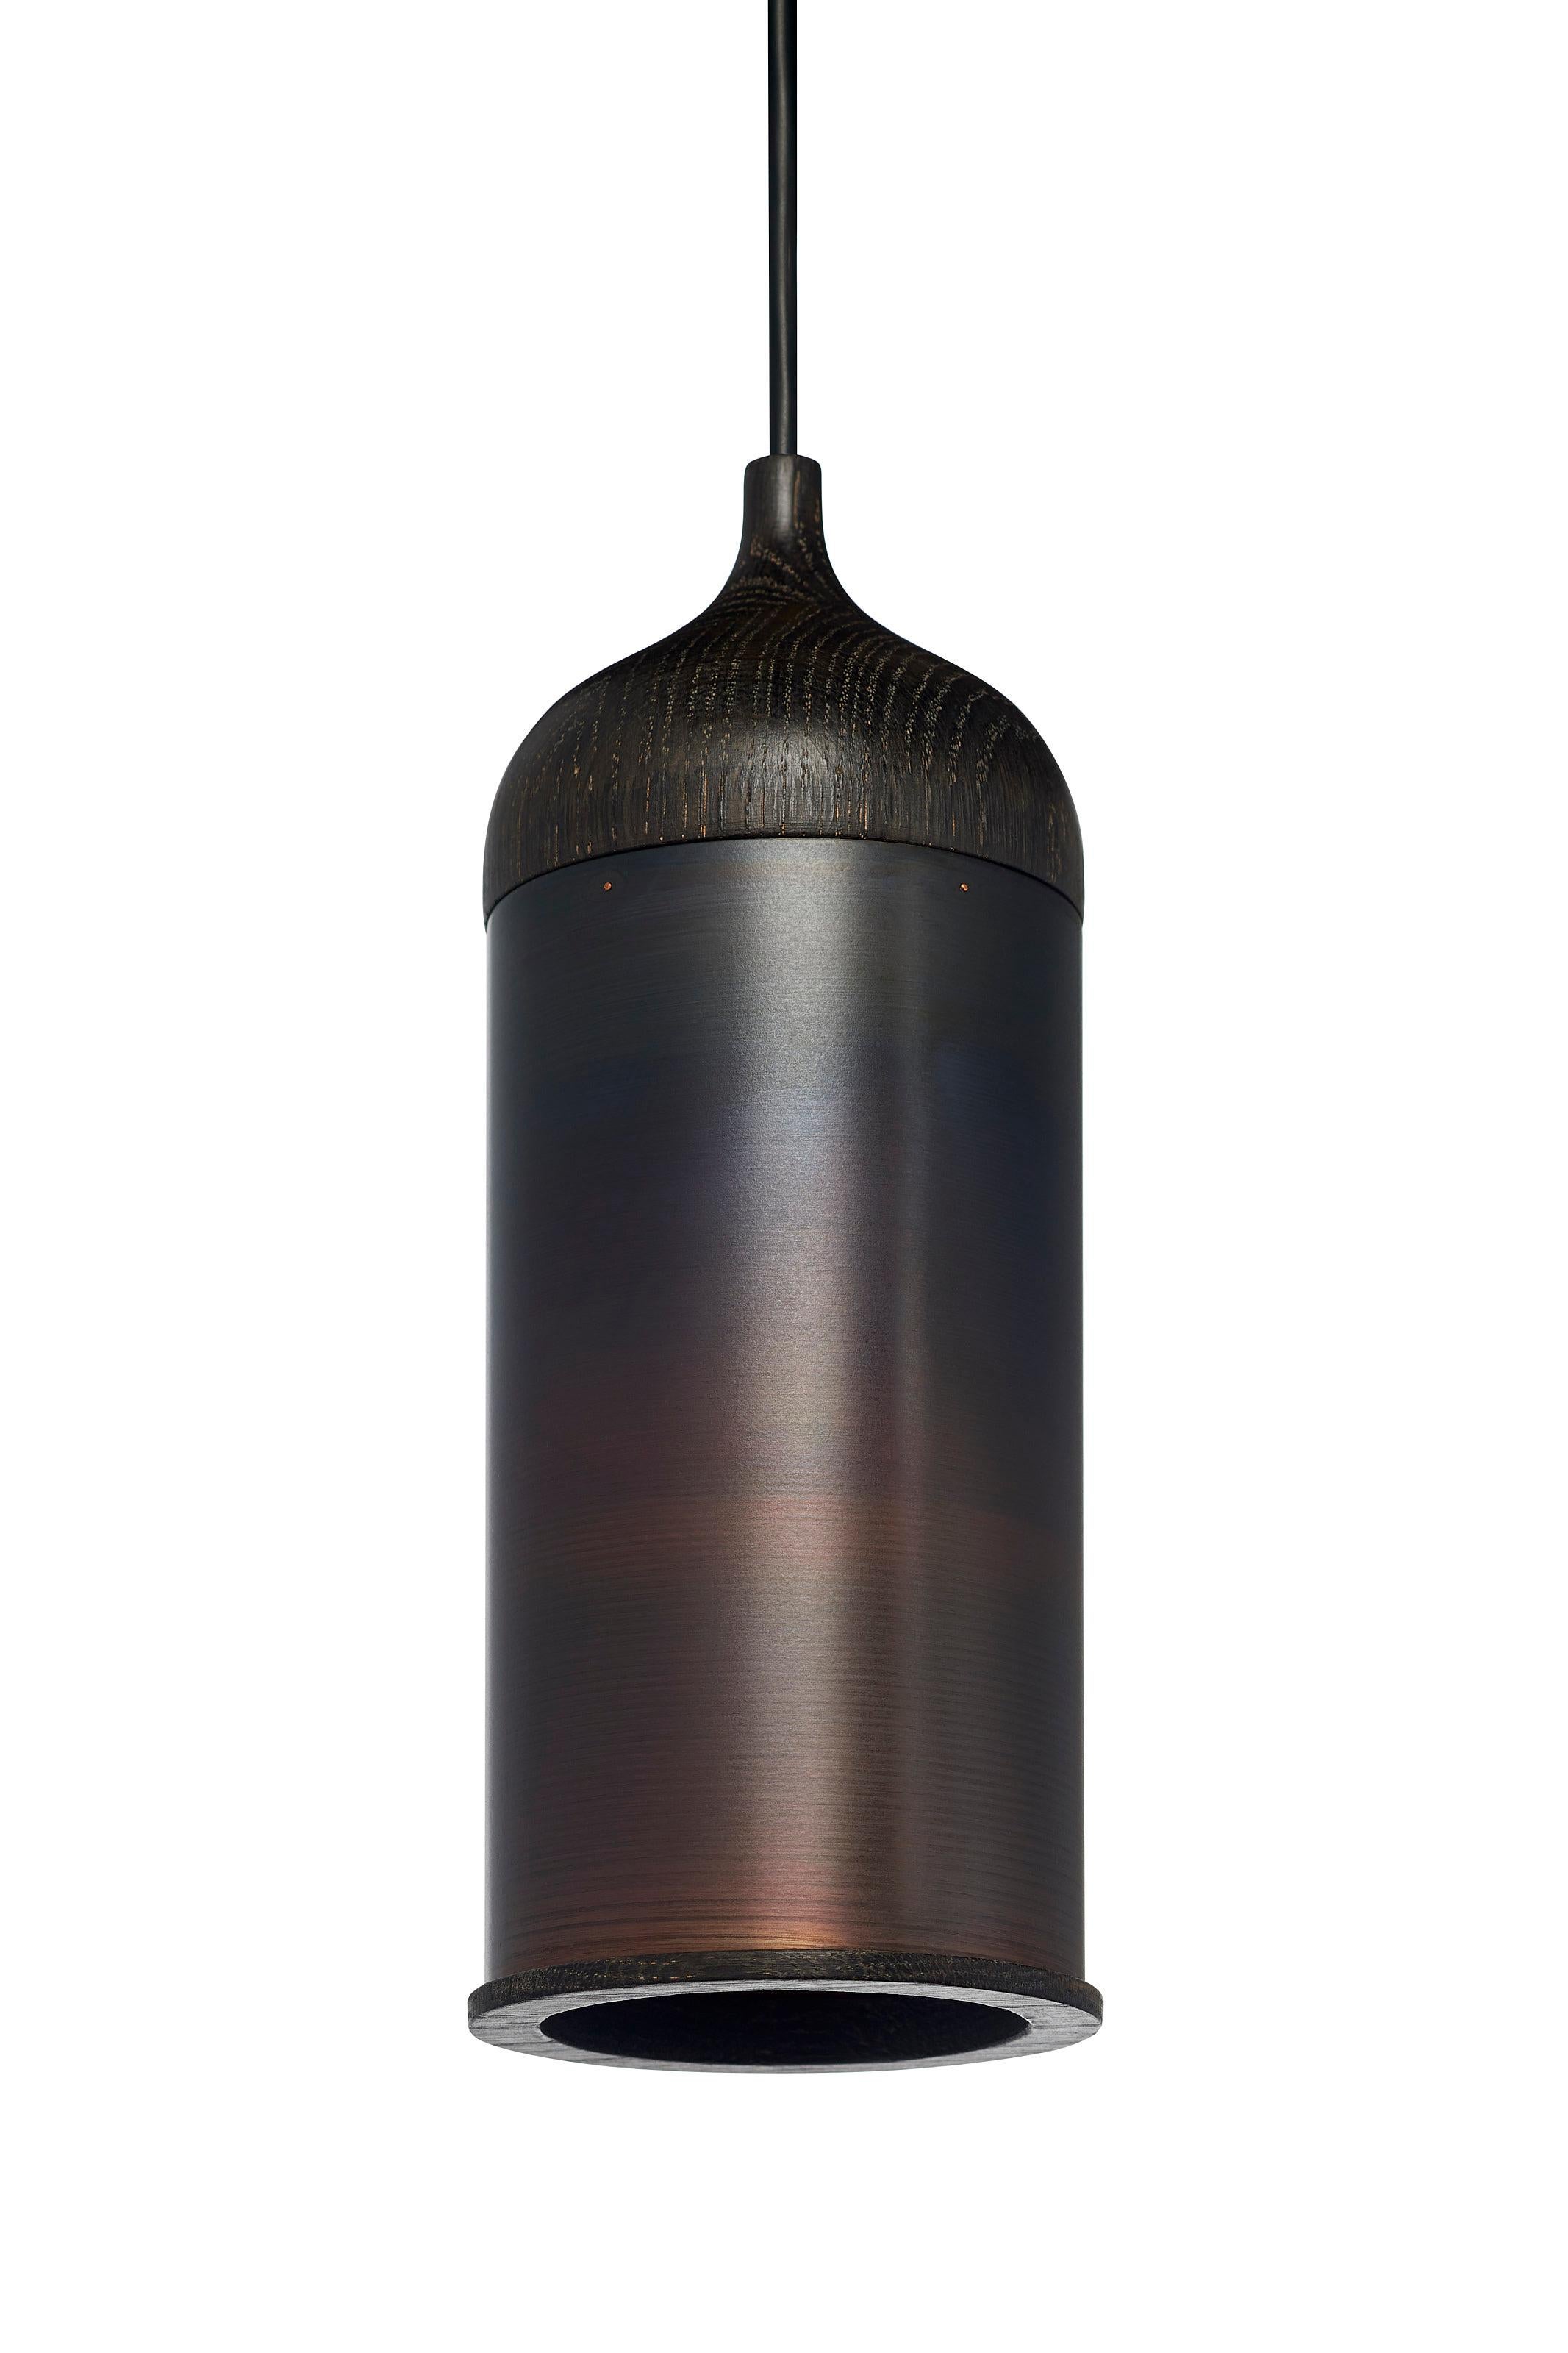 The black version of our well-known copper lamp. The copper is blackened with an acid which gives a natural black color with copper undertone. 

A cool led light reflects inside the copper pendant lamp. It creates a clear light center which is